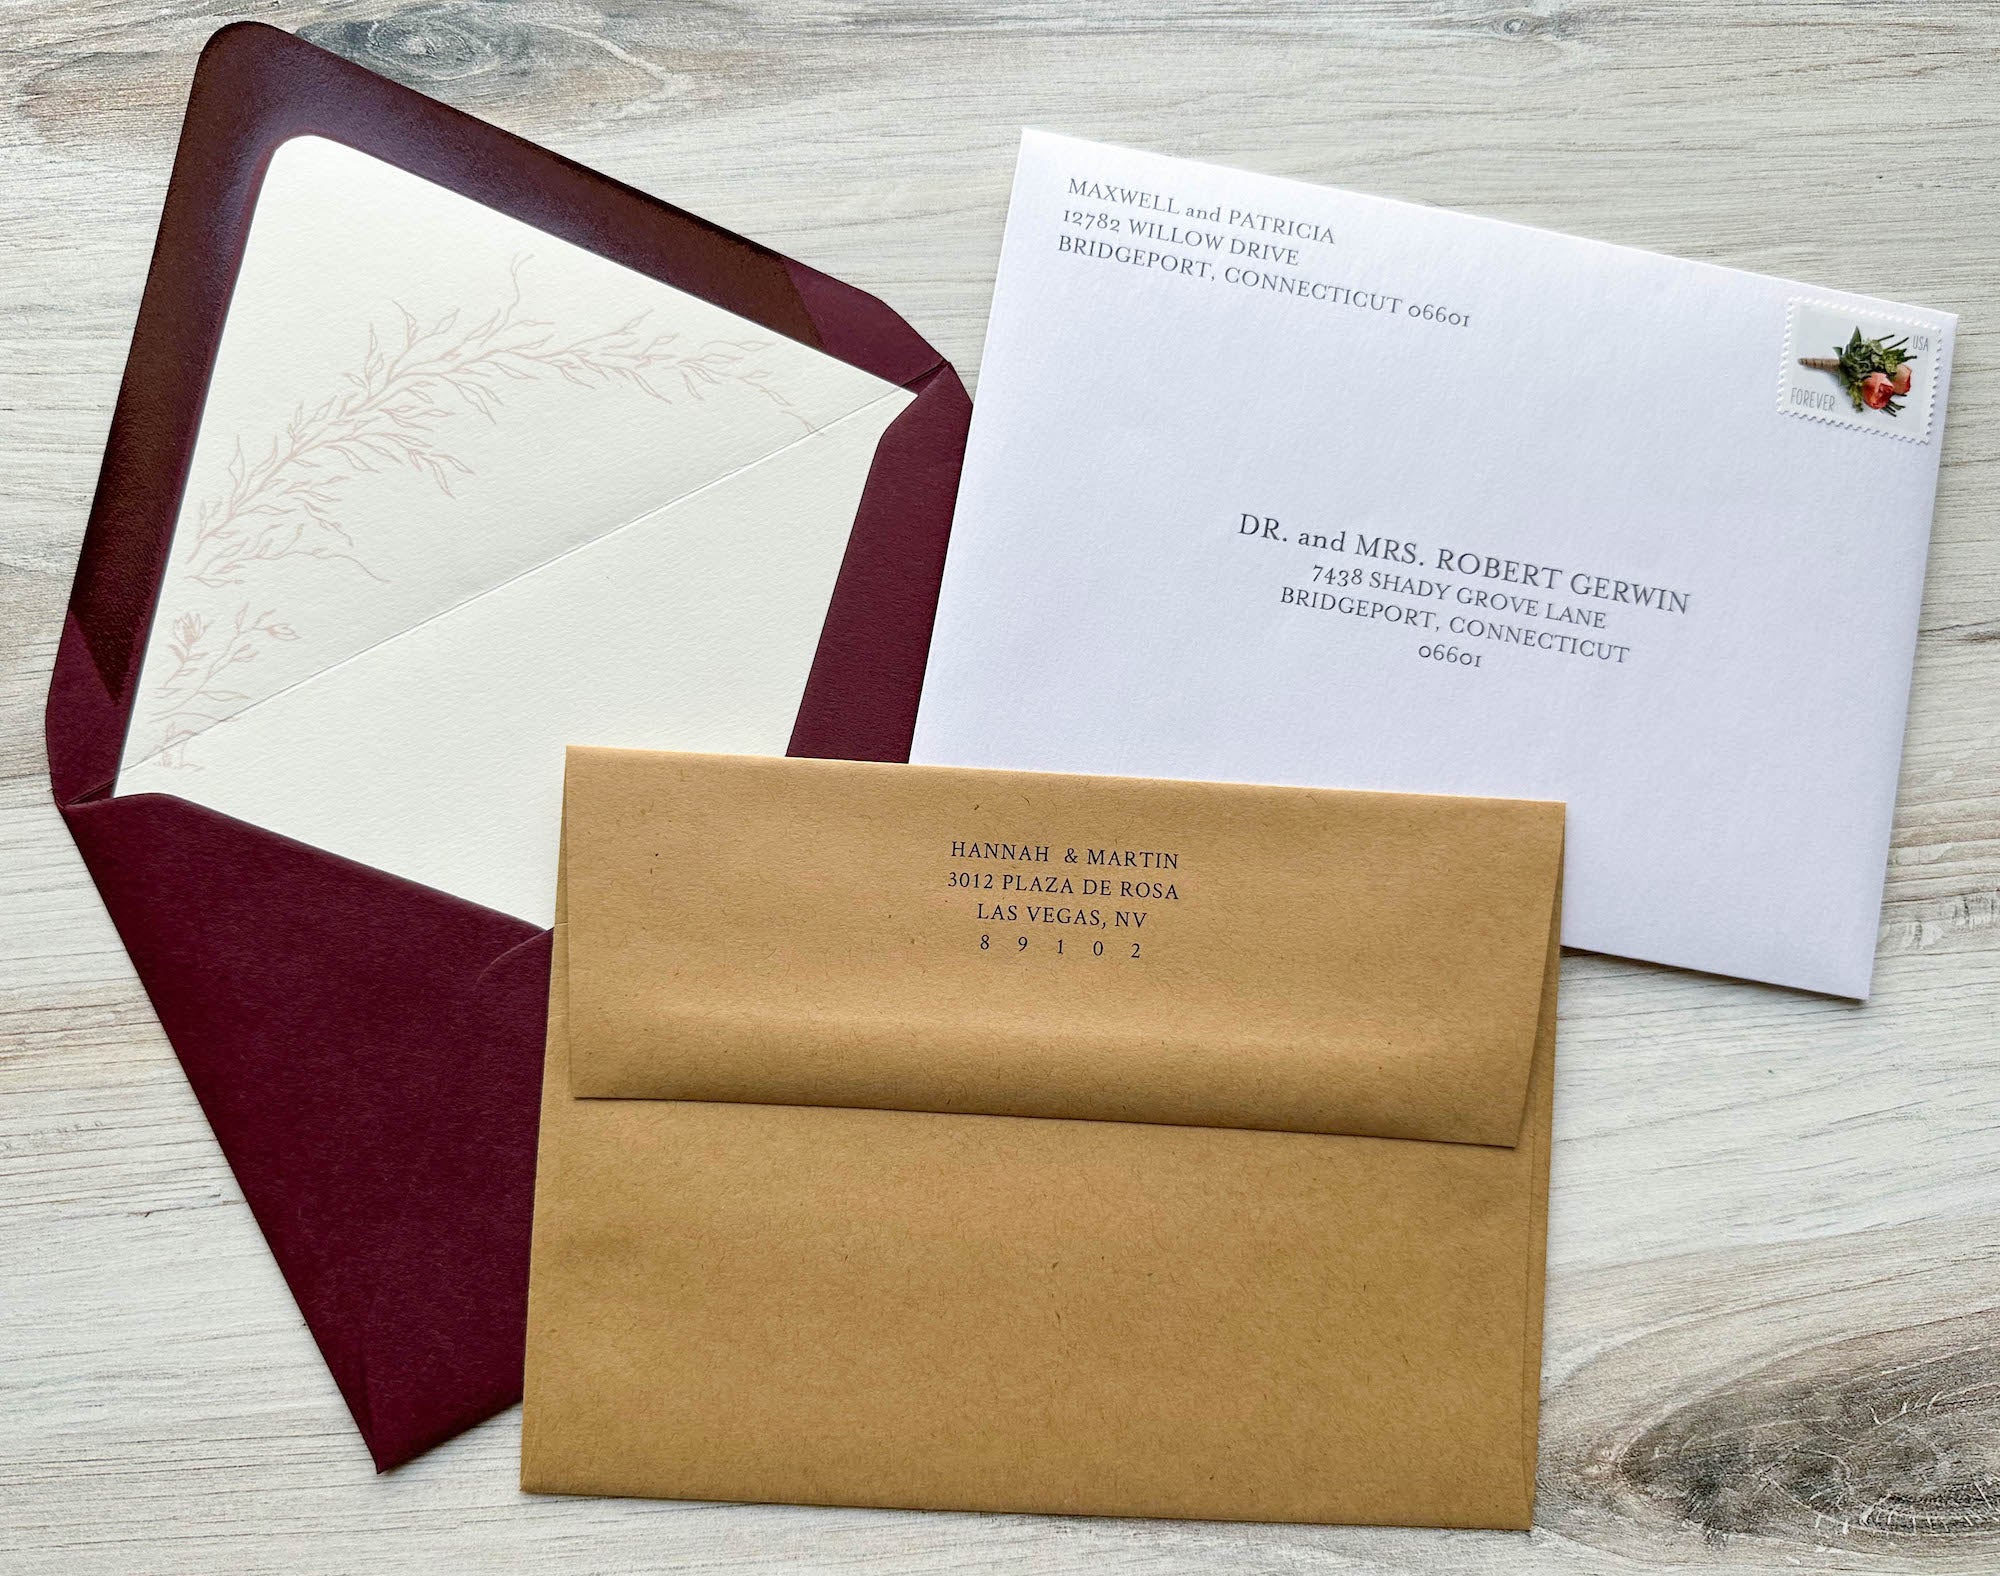 group of envelopes with addresses and liners